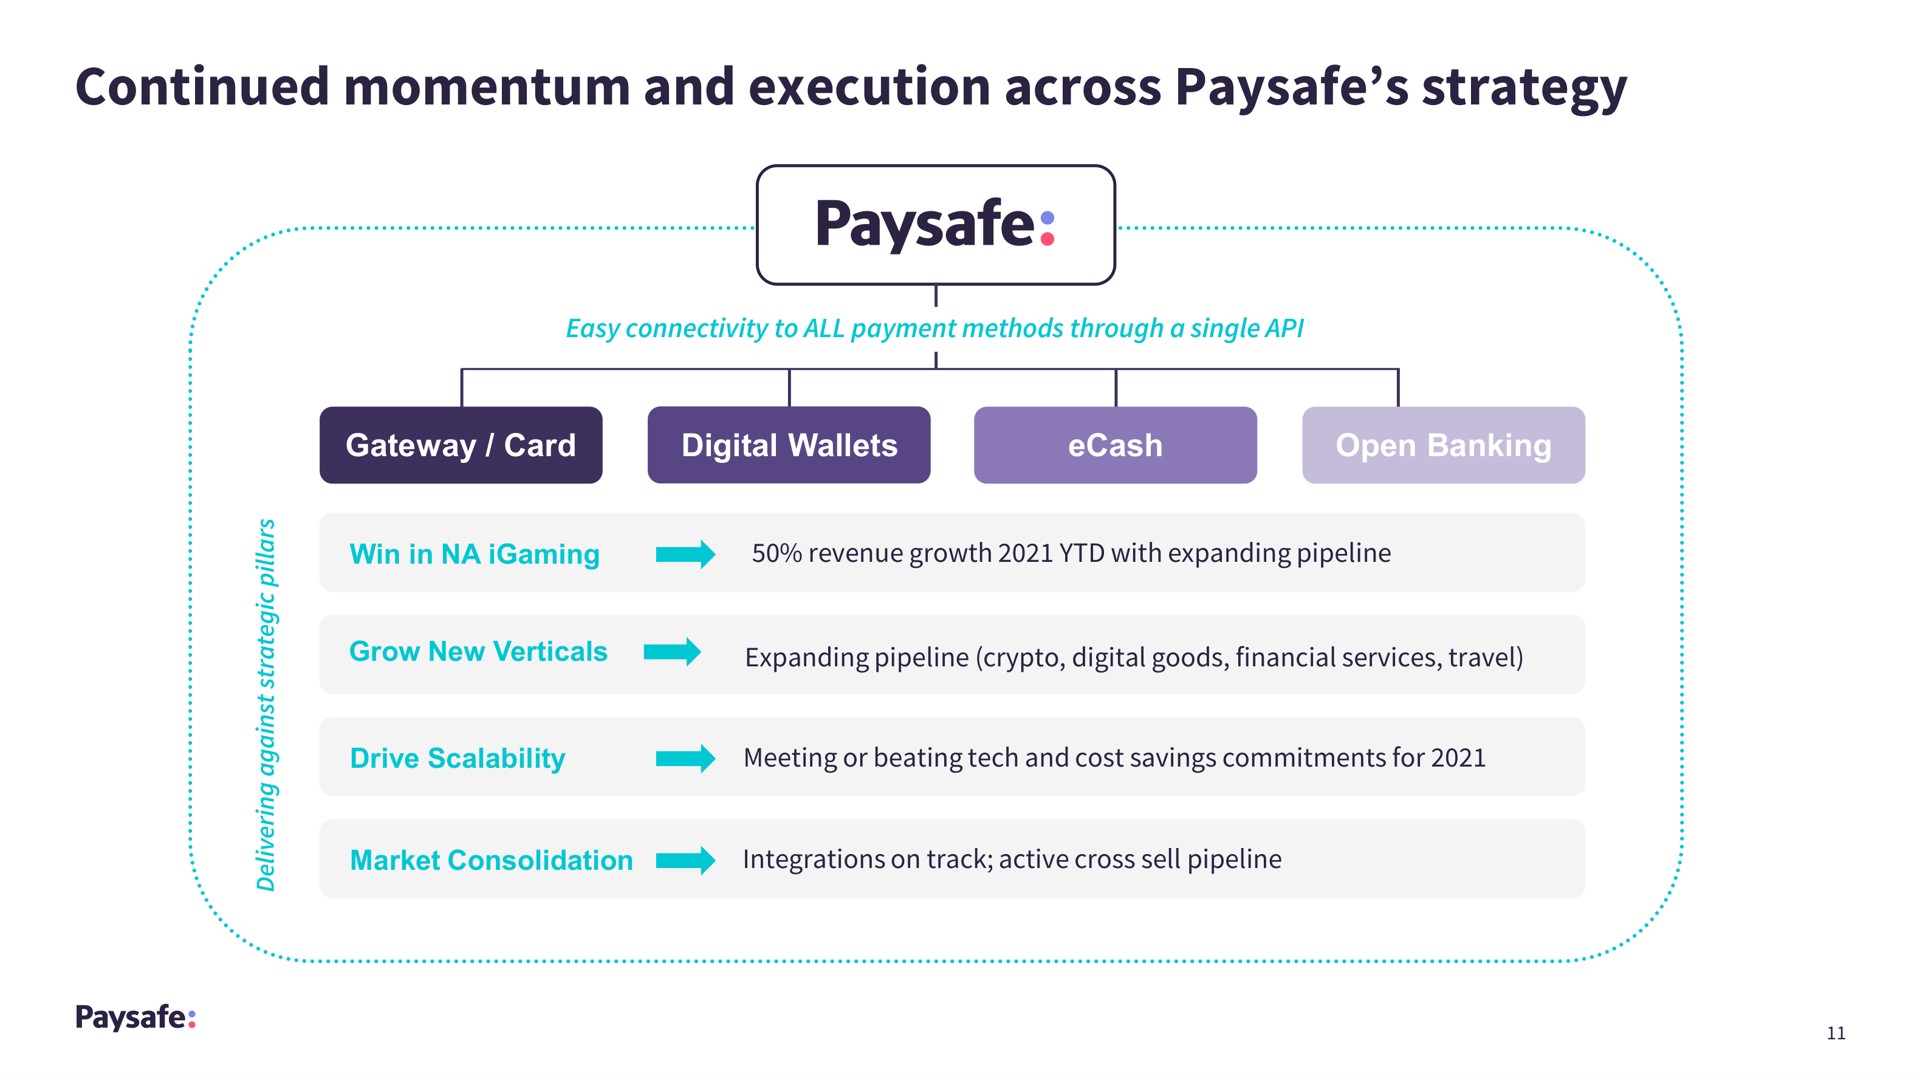 continued momentum and execution across strategy ree | Paysafe